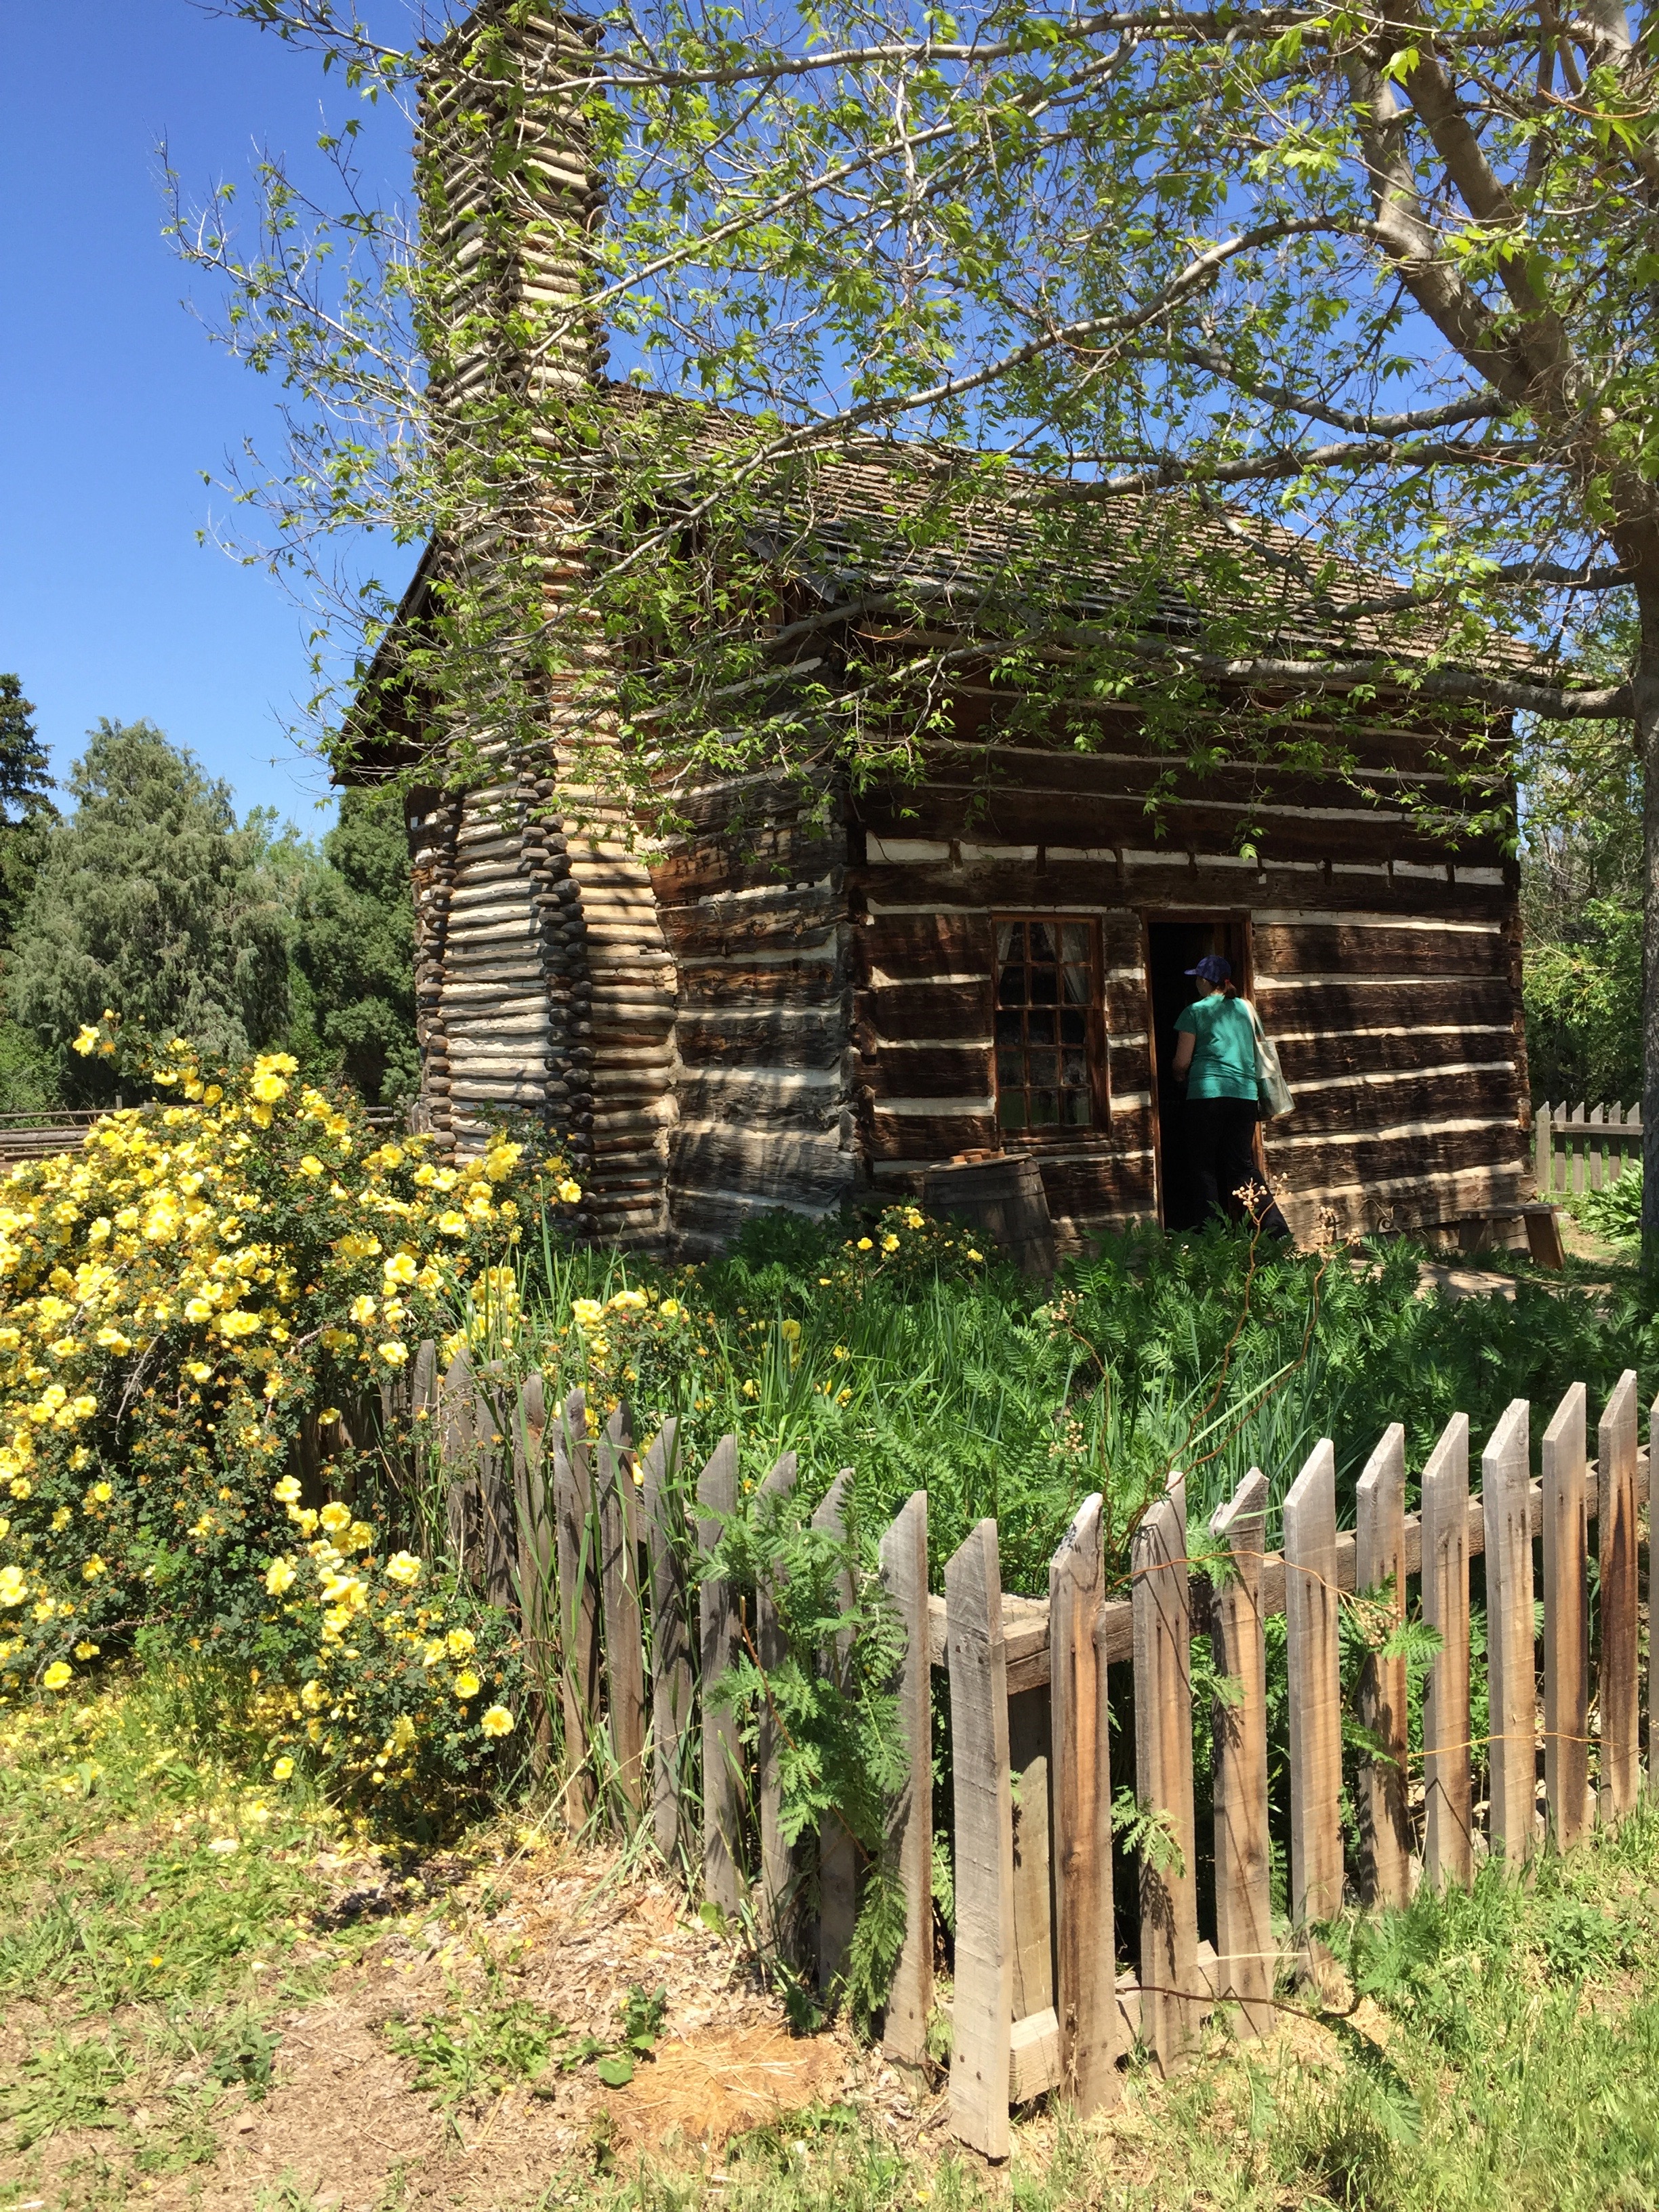 "Littleton Farms Pioneer Cabin photo with Harrison Rose" - photo by Marilyn